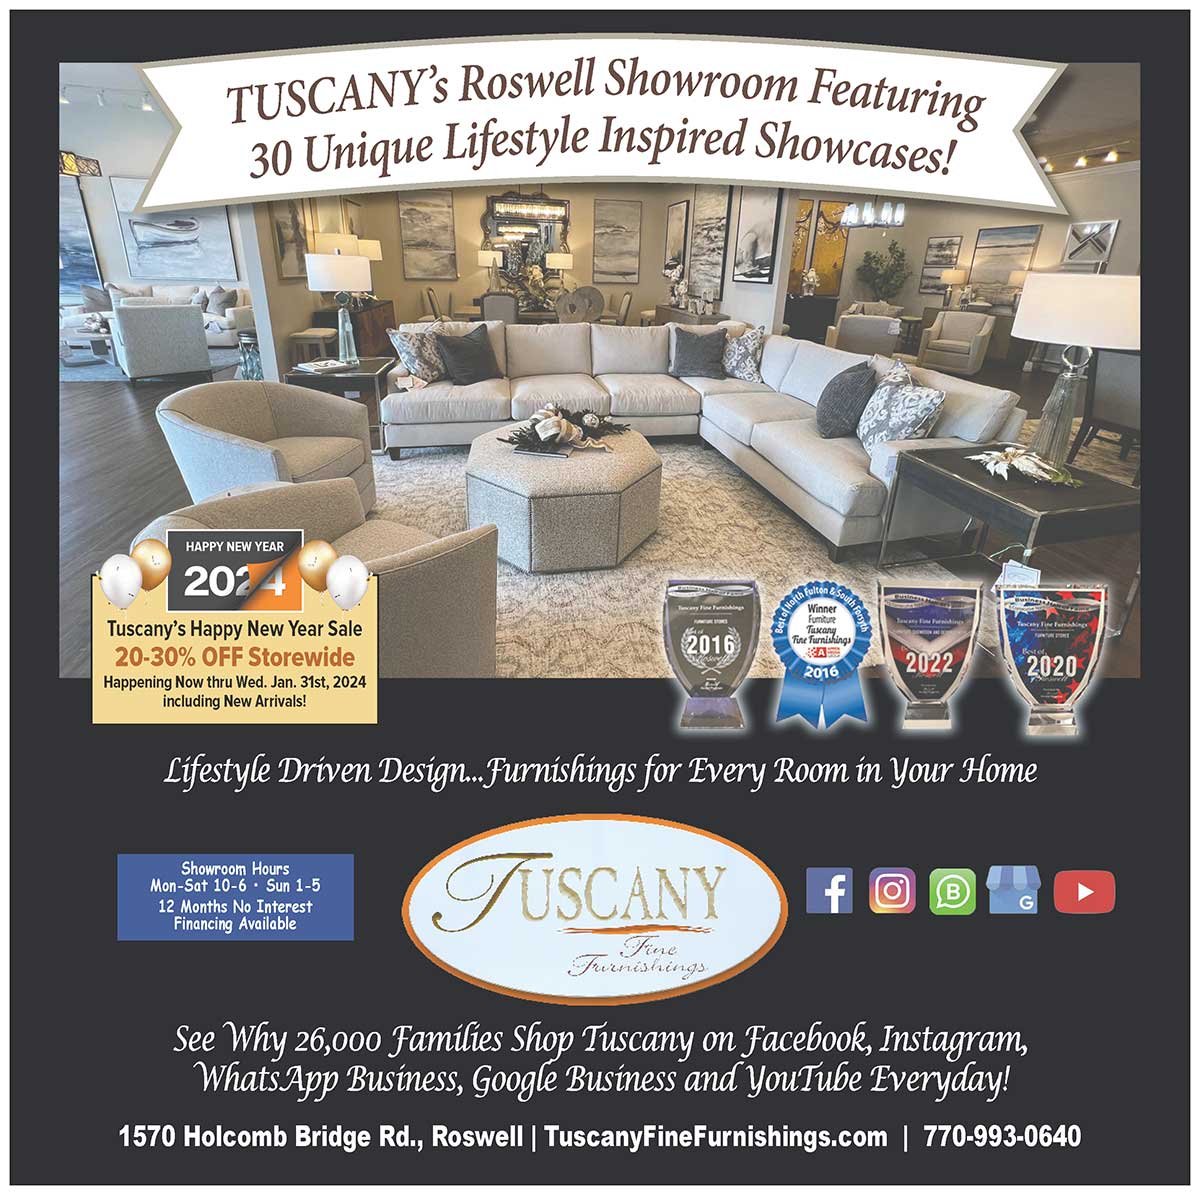 advertisement for Tuscany Fine Furnishings January 2024 sales